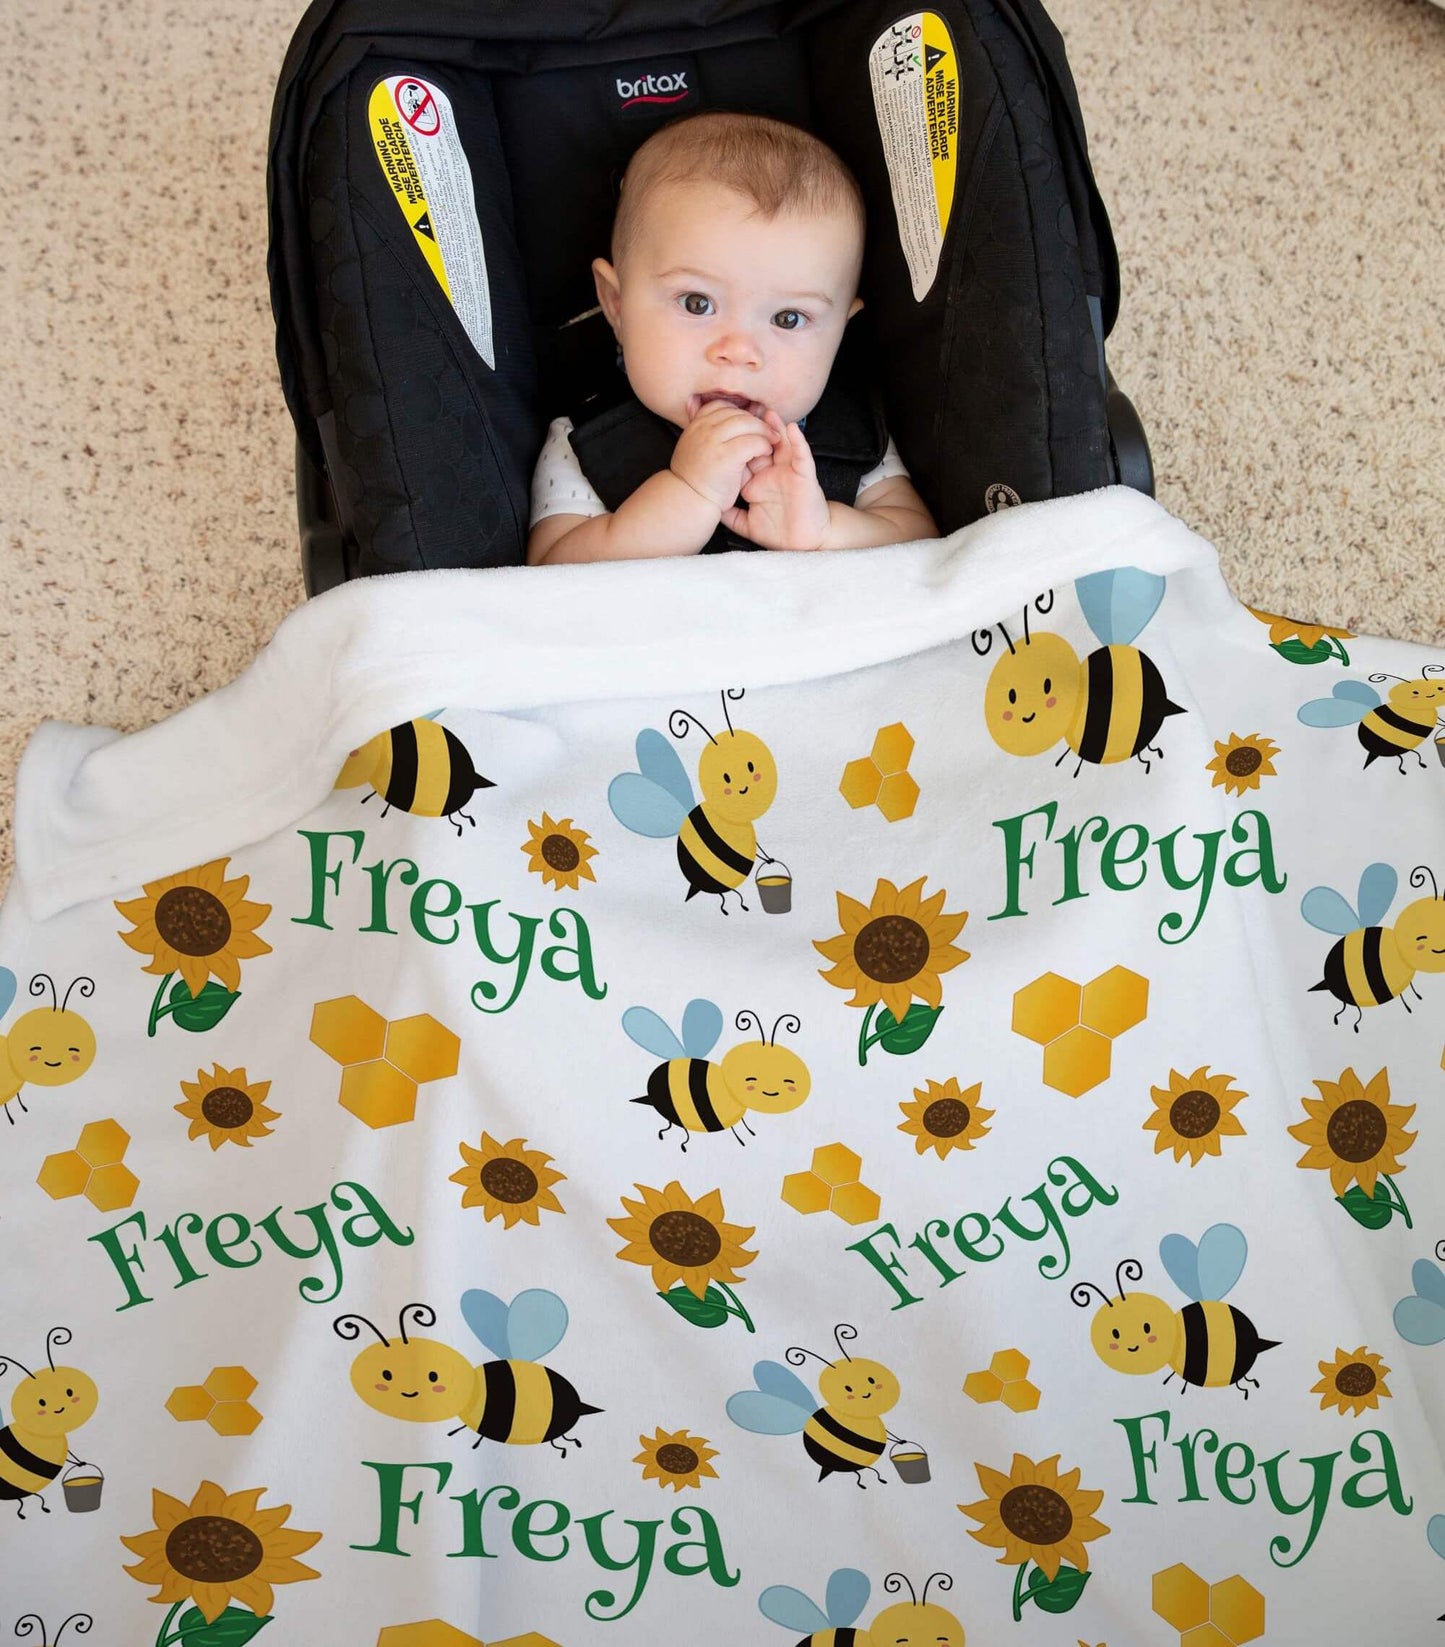 Personalized Baby Blankets for Girls and Boys with Name, Honey Bees, Sunflowers